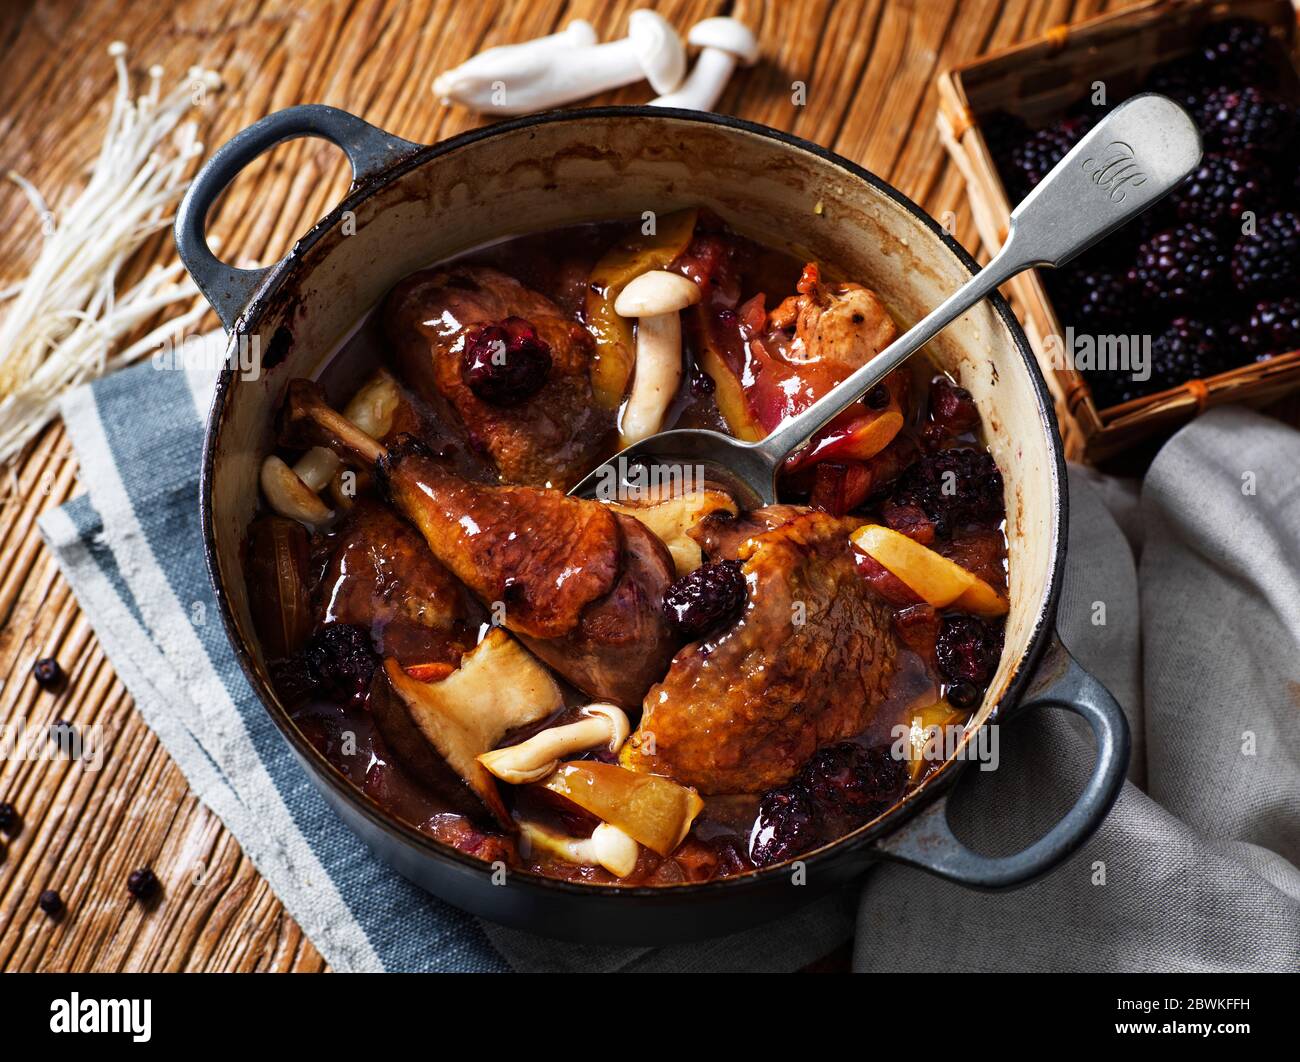 Traditional British Braised Pheasant with Berries and Mushrooms, home cooked meal Stock Photo